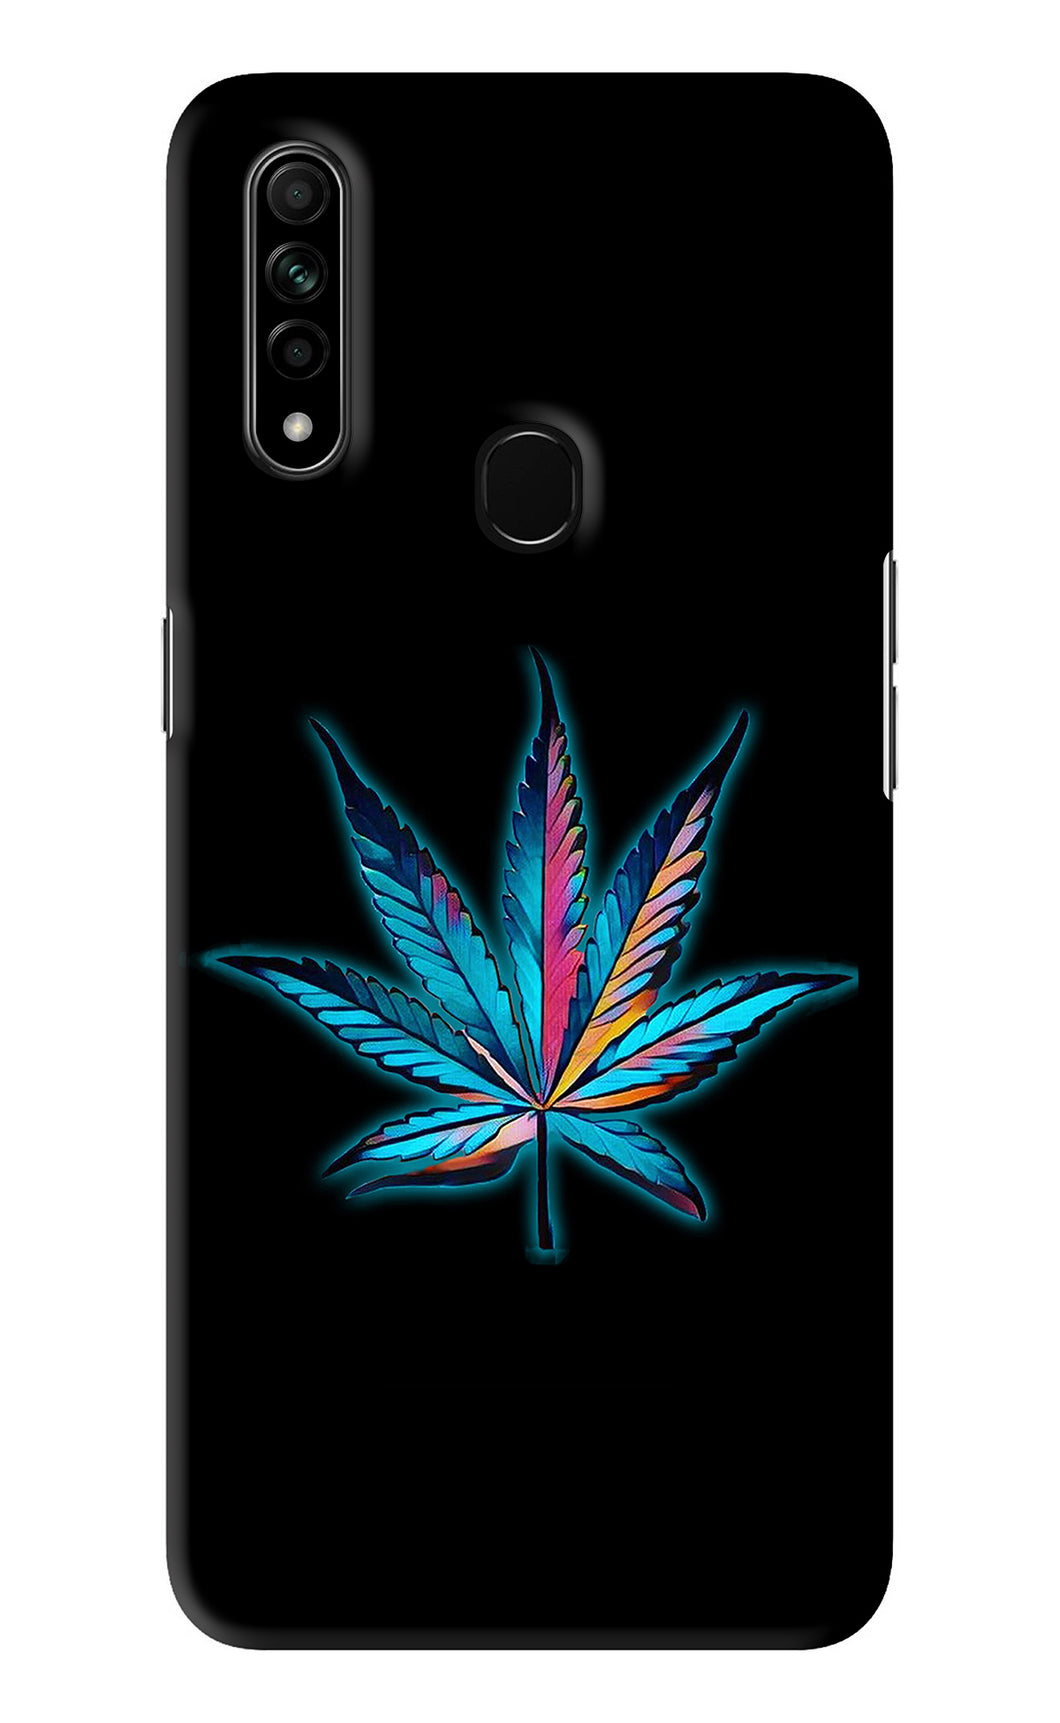 Weed Oppo A31 Back Skin Wrap